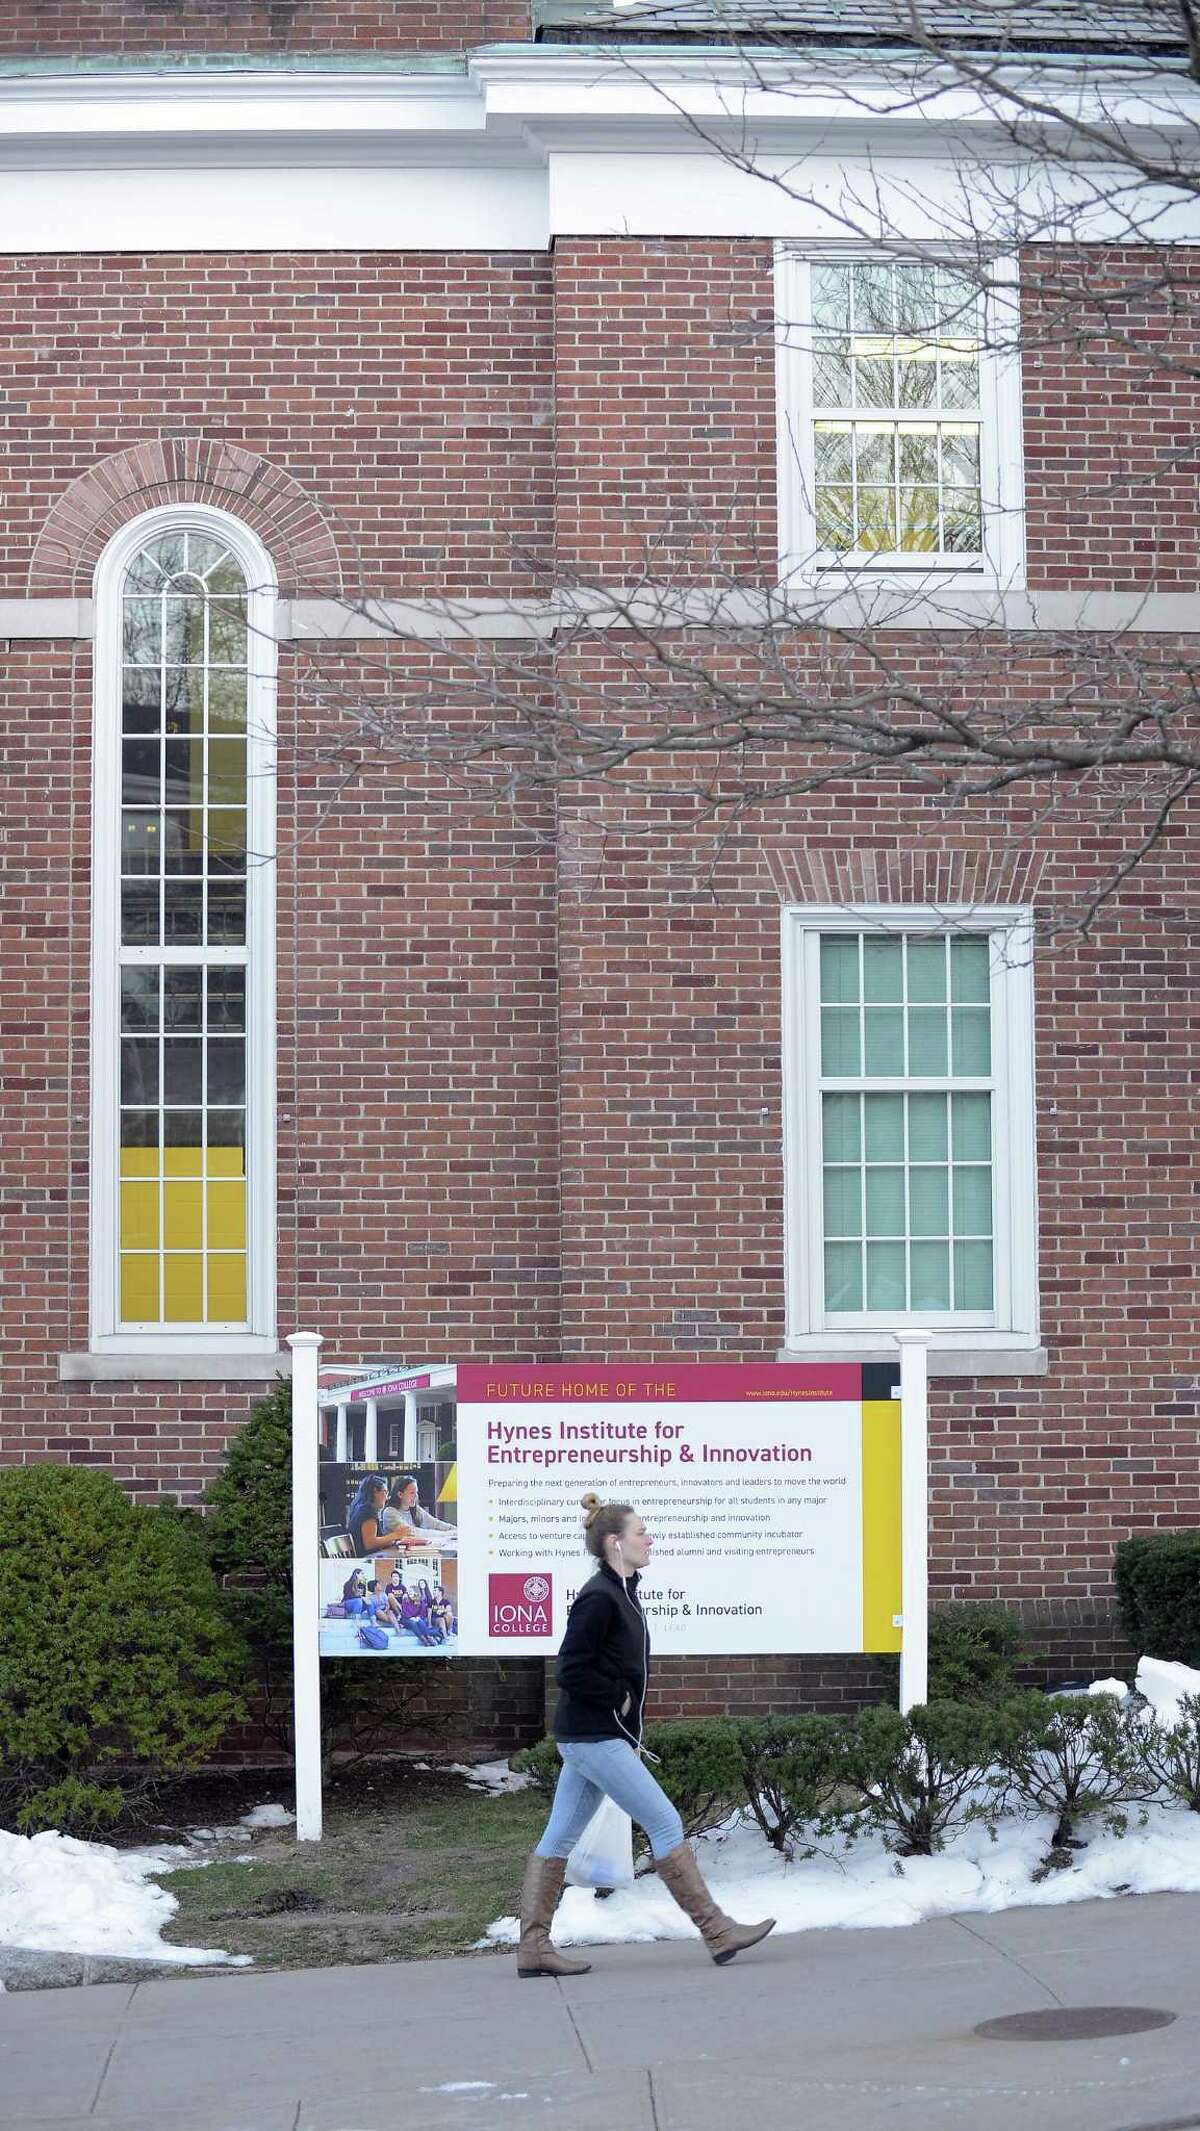 A student walks past Spellman Hall, the future home of the Hynes Institute at Iona College in New Rochelle, NY on March 21, 2017. James and Anne Marie Hynes of Greenwich donated $15 million to the school. James Hynes has very fond memories of his old alma mater, Iona College in New Rochelle, N.Y. Hynes parents were immigrants from Ireland, and he was the first of his family to graduate from college in 1969 from the college founded in 1940 by the Christian Brothers. His education there put him on the path toward a very successful career as an entrepreneur and telecommunications executive, with a residence along the shore in Greenwich.